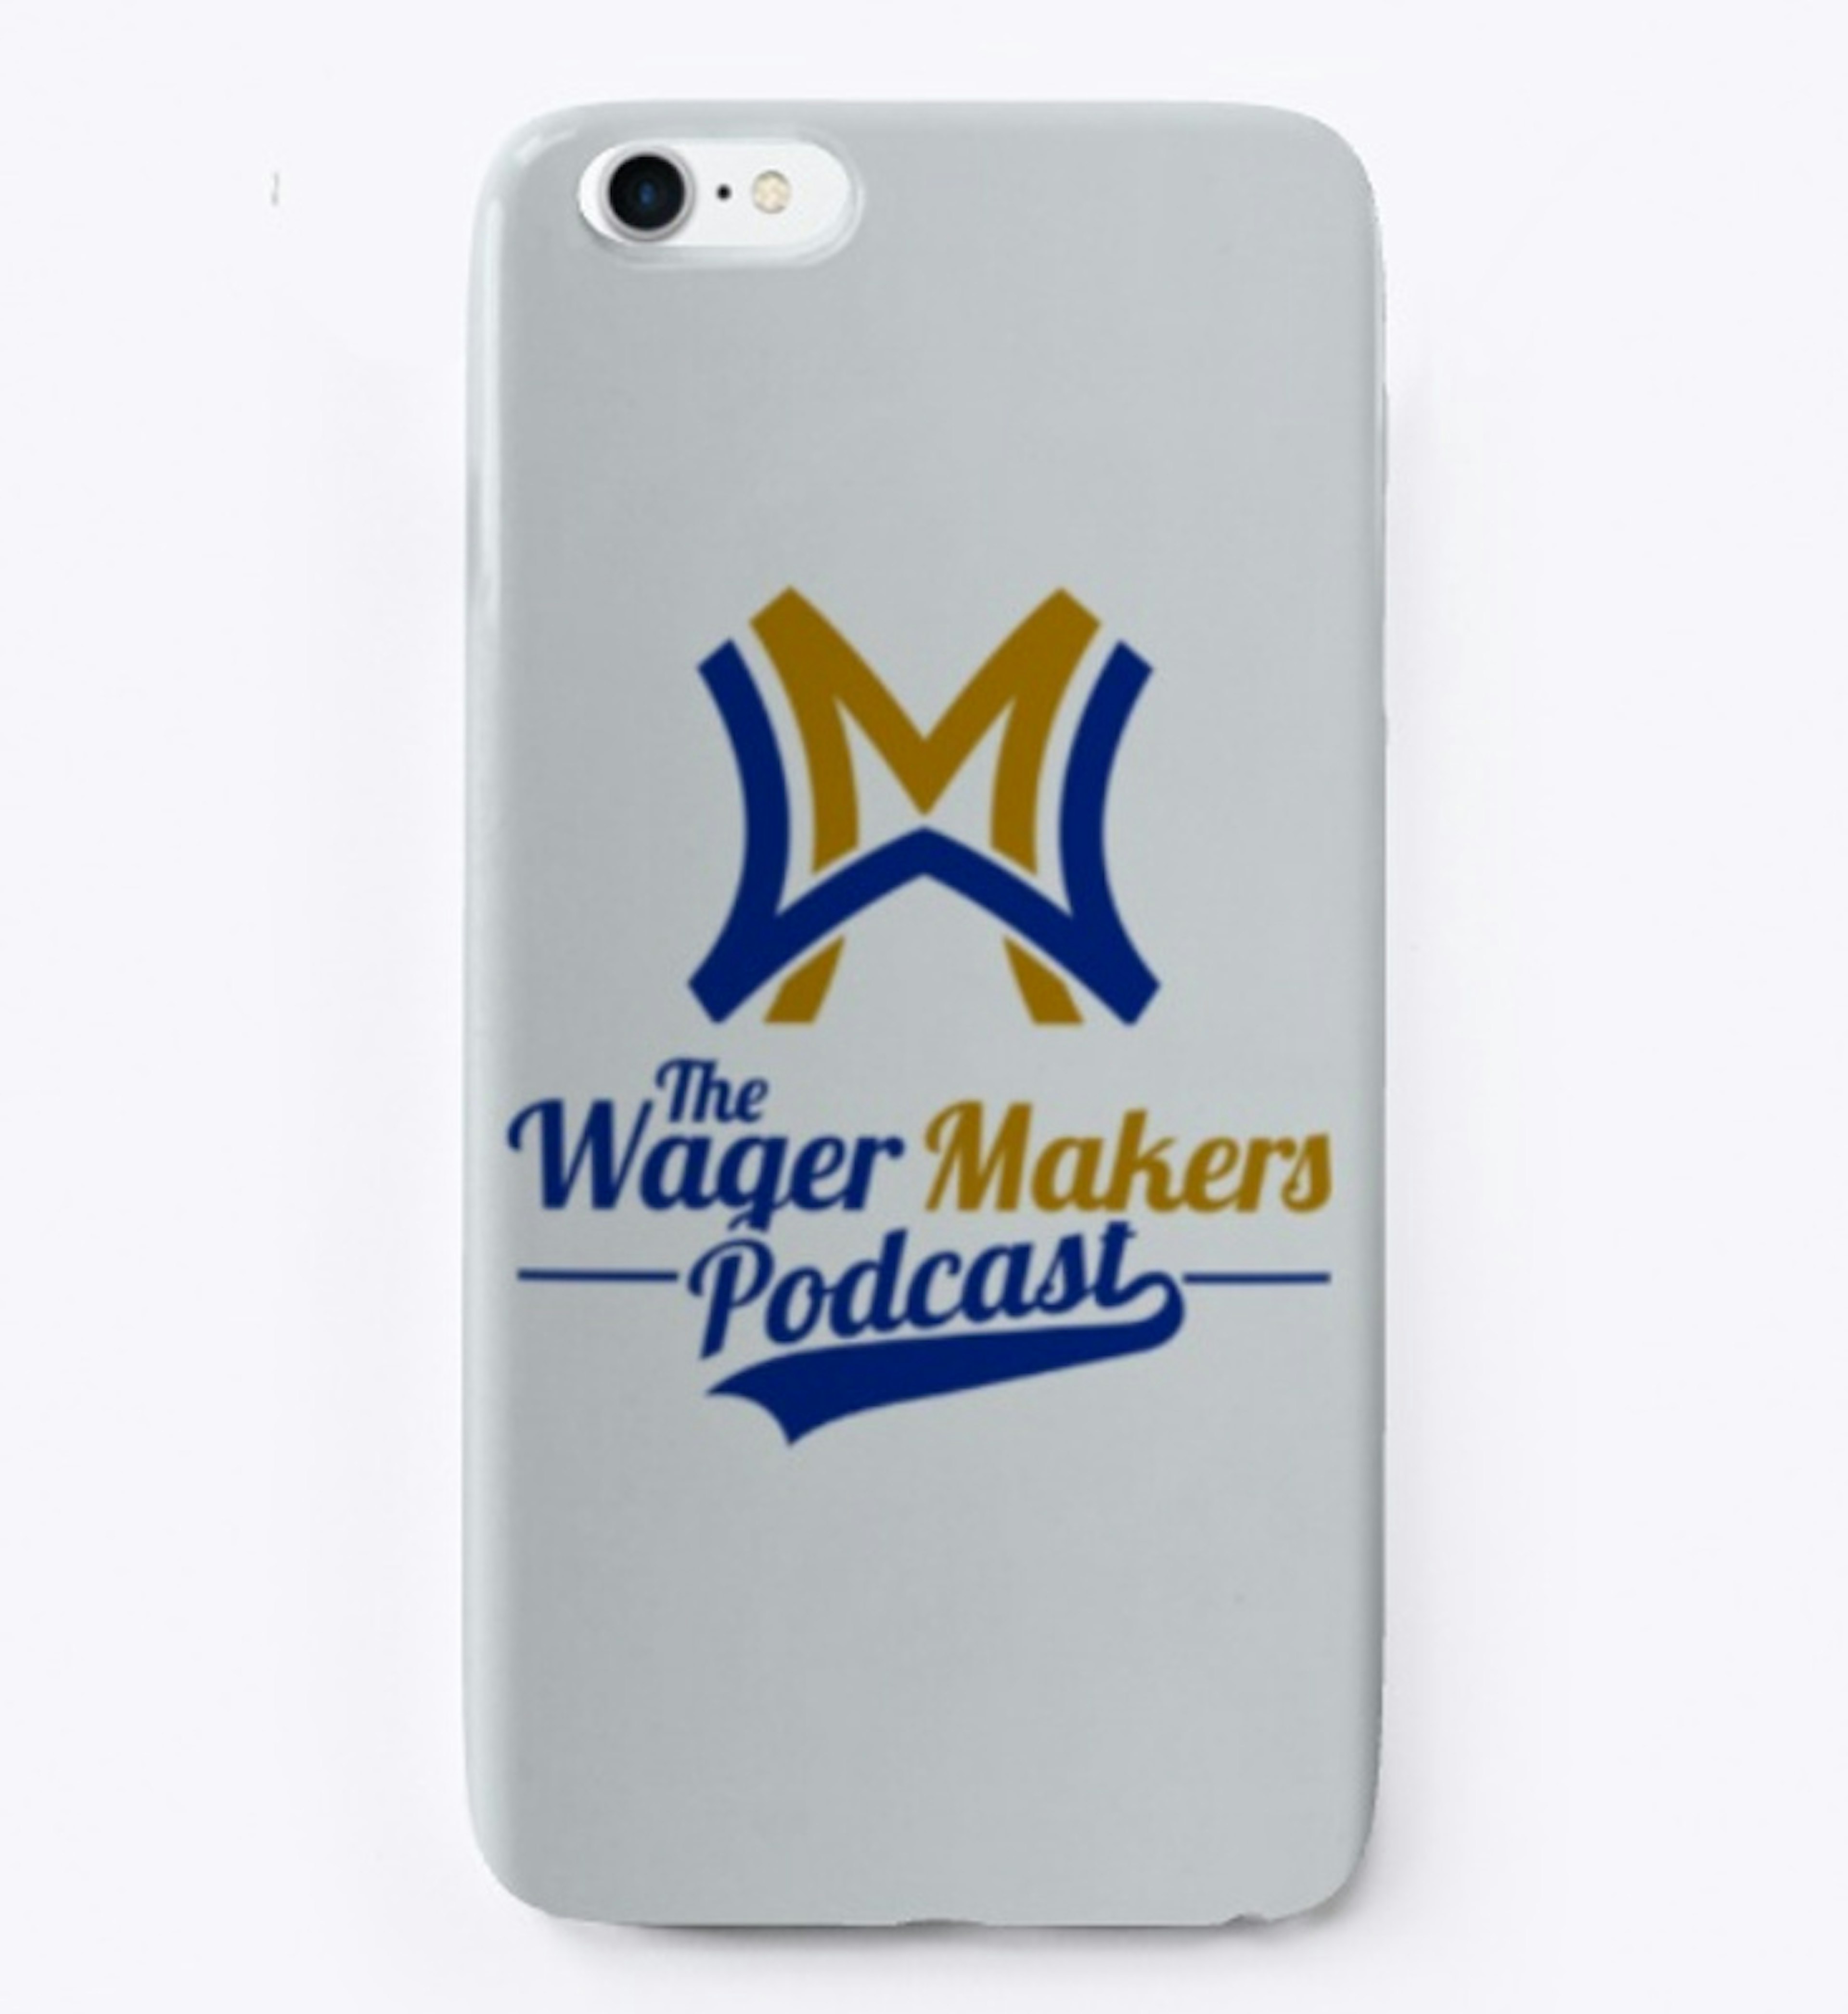 Protect the Iphone with the WMs